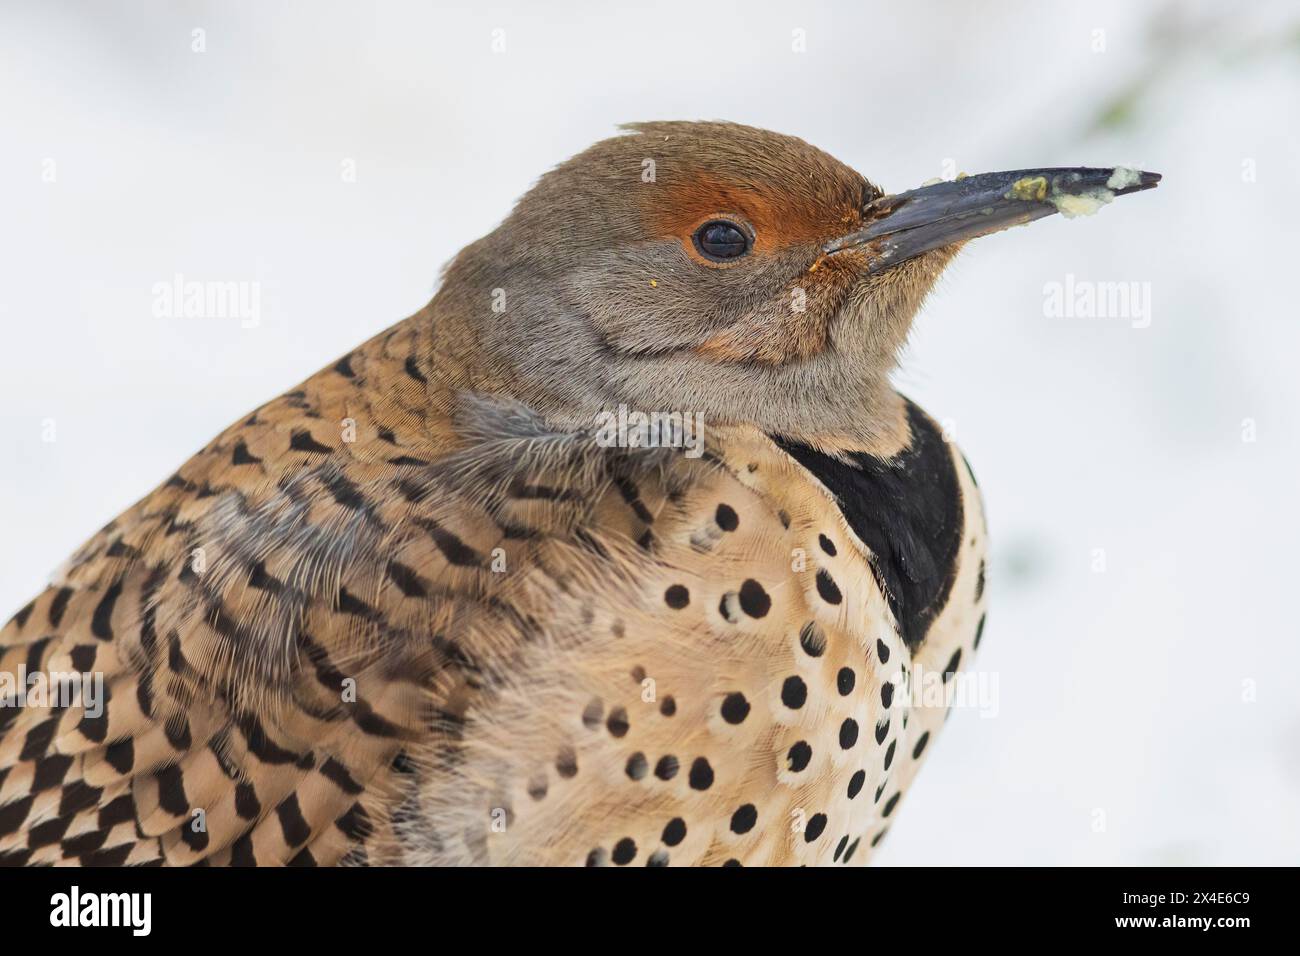 Canada, British Columbia, Boundary Bay, Northern flicker (red-shafted) first winter Stock Photo